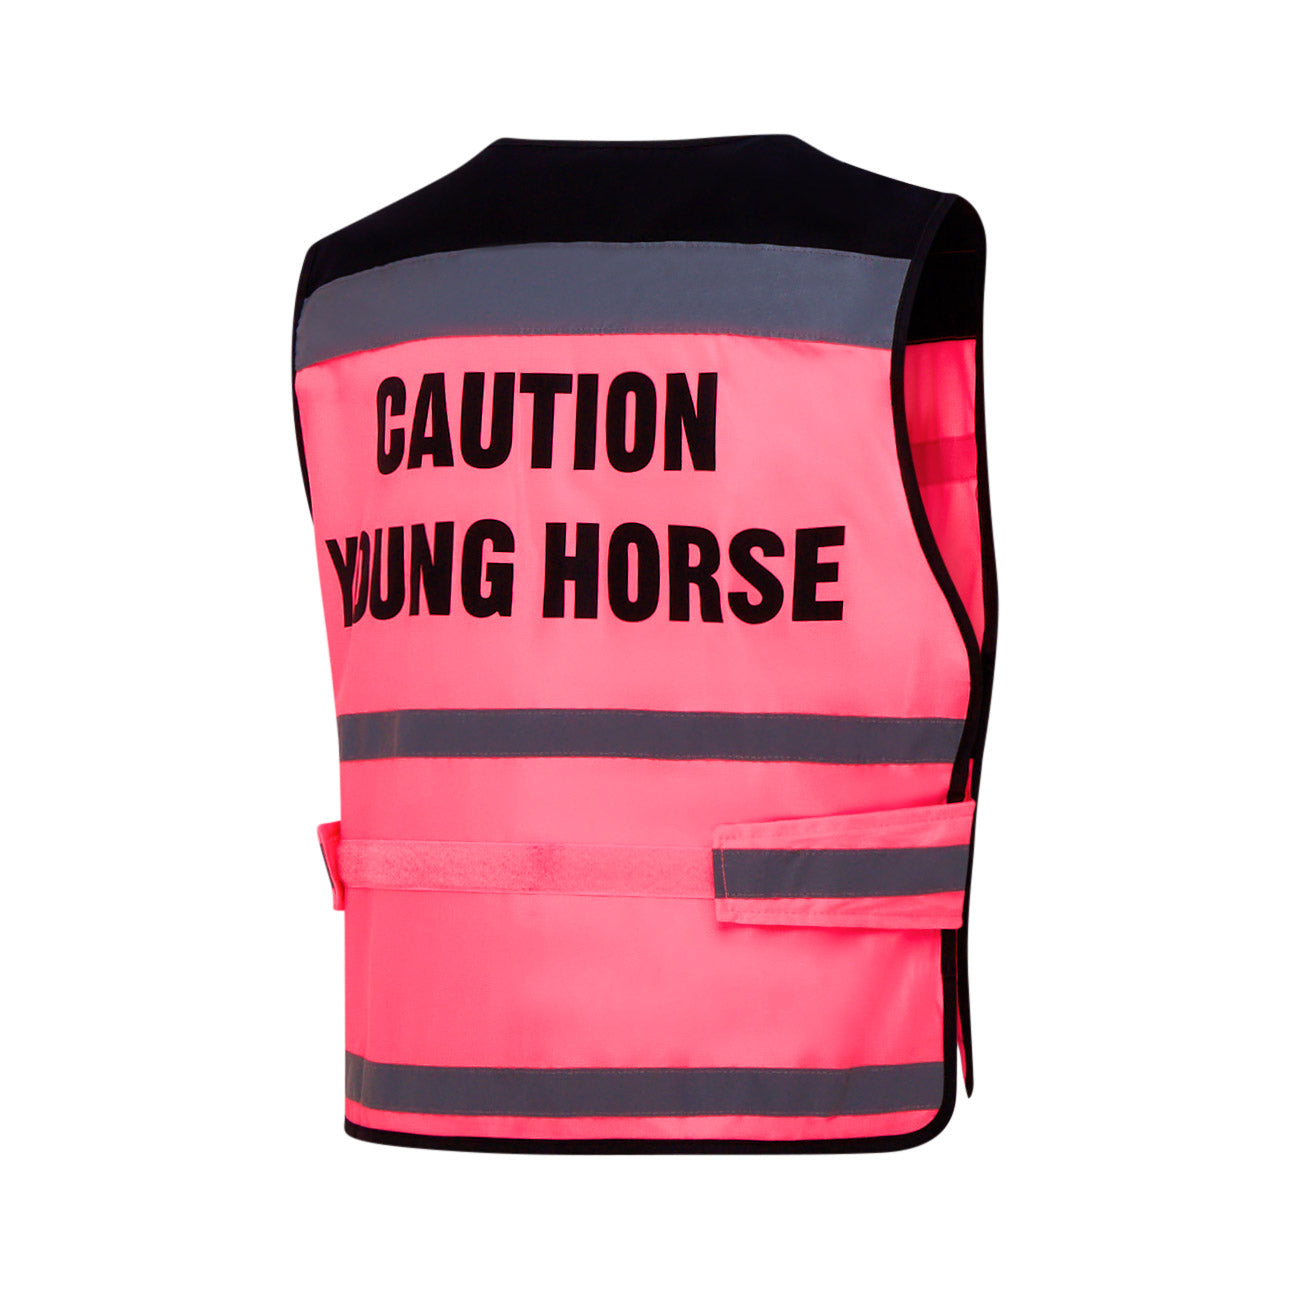 Equisafety Child Hi Vis Waistcoat - Pink -Caution Young Horse 